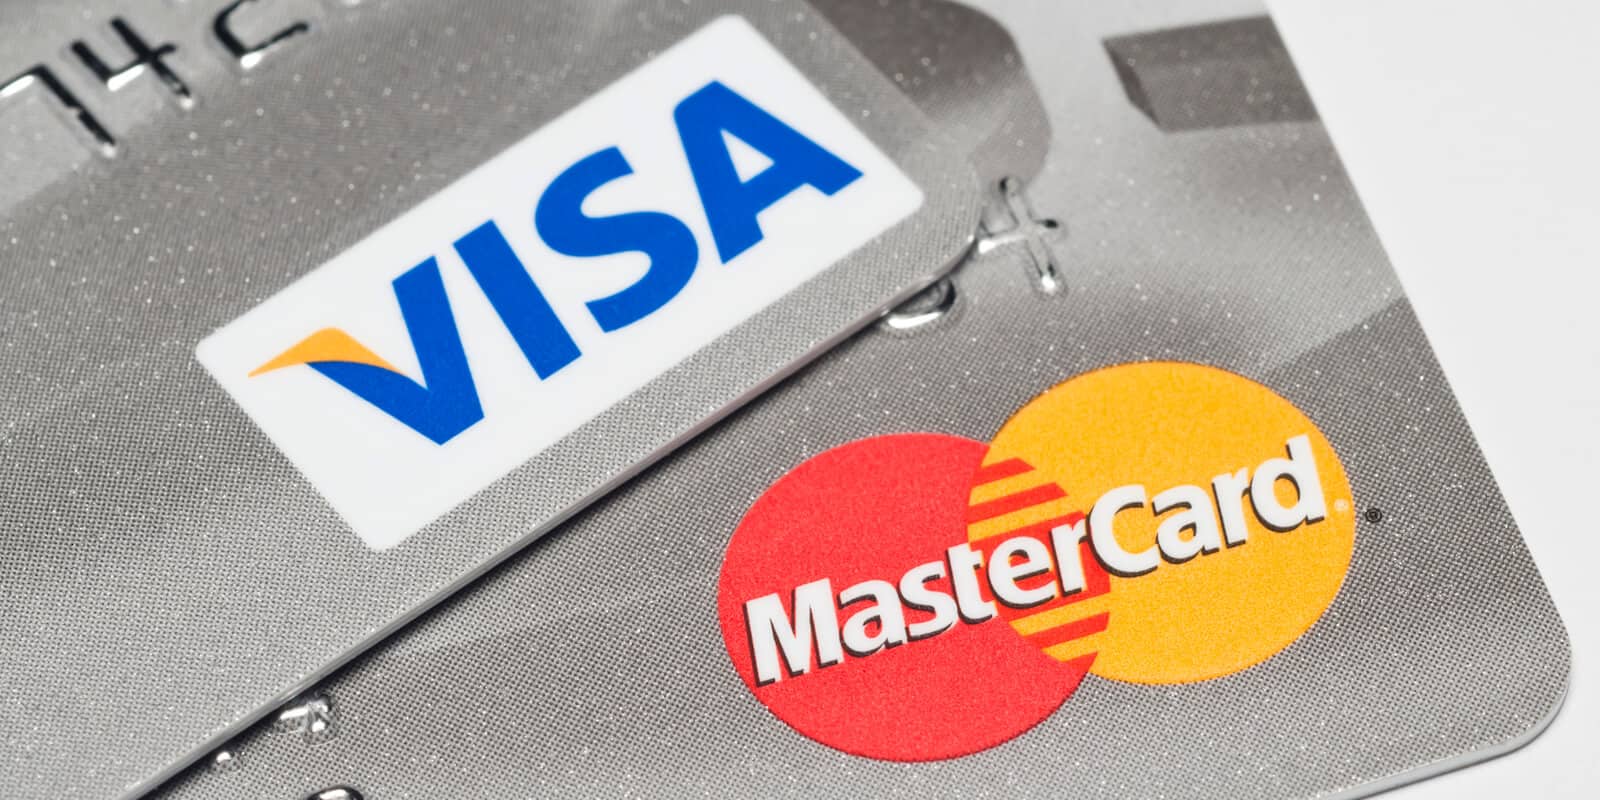 Is There a Difference Between Visa and MasterCard? Visa Vs. MasterCard